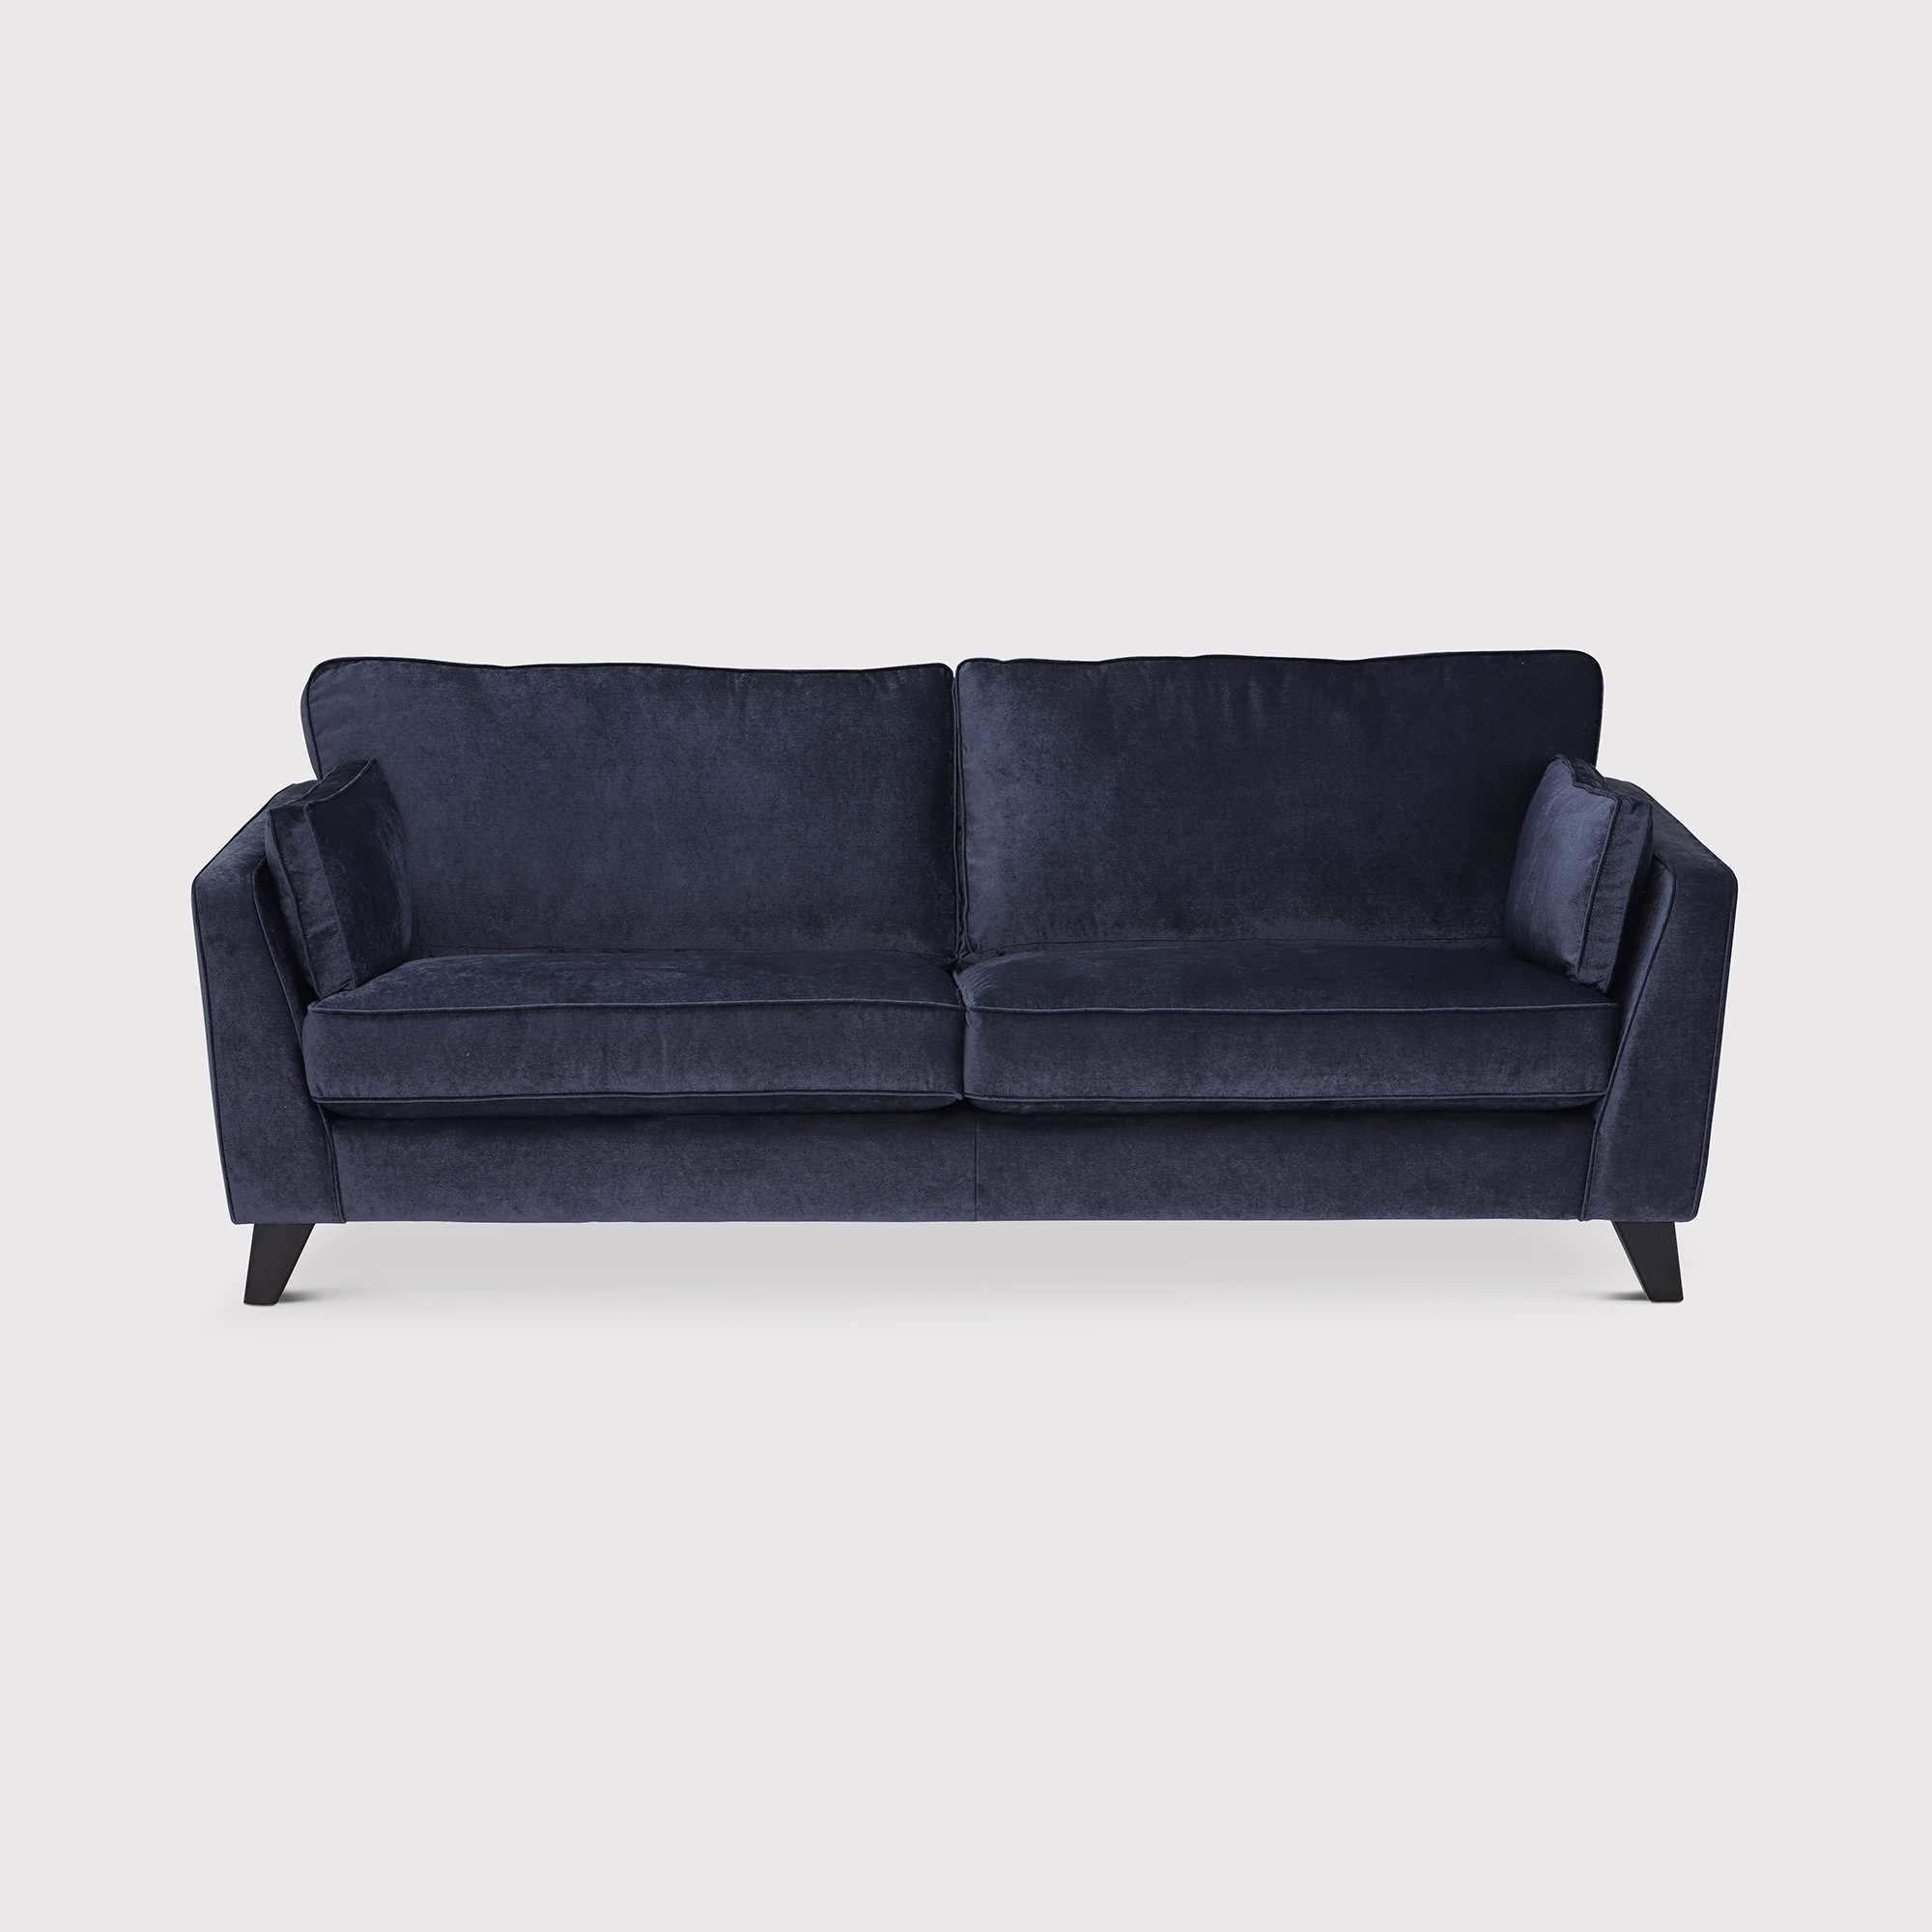 Rene 4 Seater Sofa Without Scatters, Blue Fabric | Barker & Stonehouse